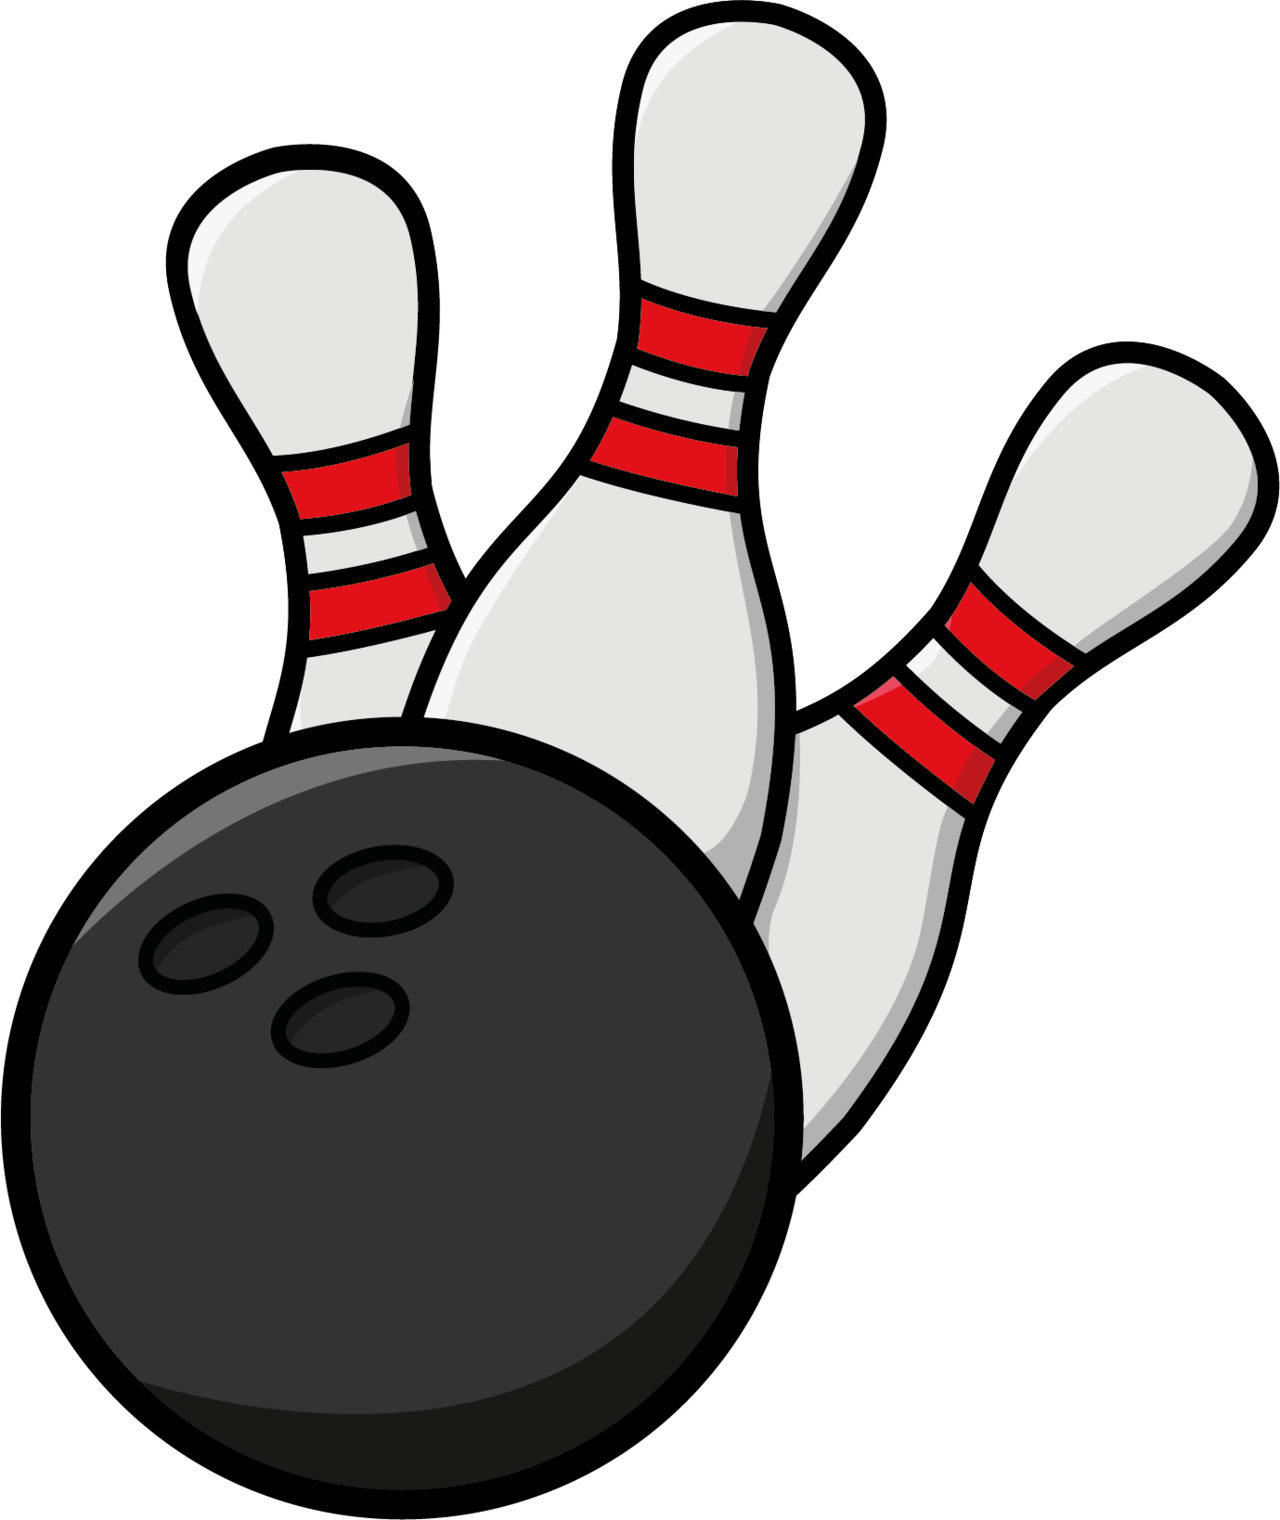 Free Cartoon Bowling Cliparts, Download Free Cartoon Bowling Cliparts